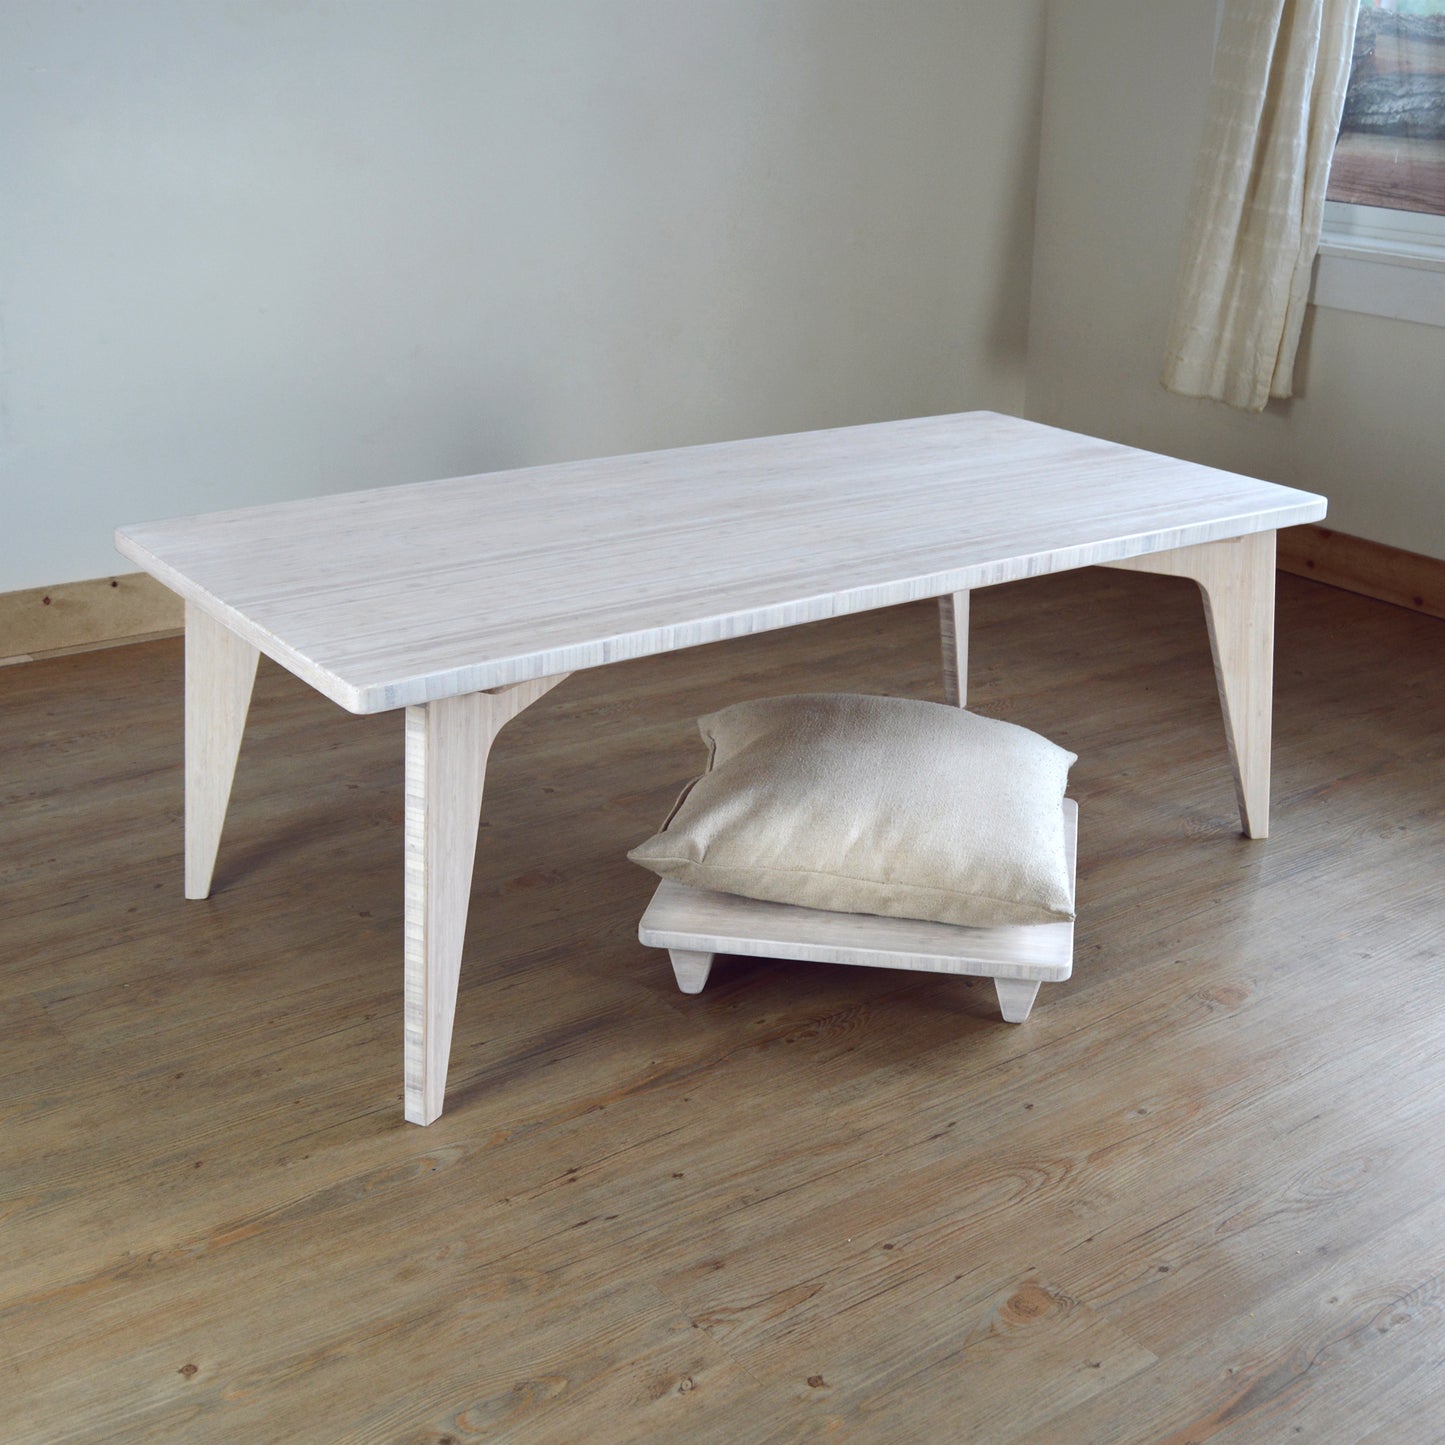 Natural bamboo pillow lift in white with table. Japanese, mid-century, Scandinavian and contemporary inspired. Sustainable wood alternative, made from solid grass.